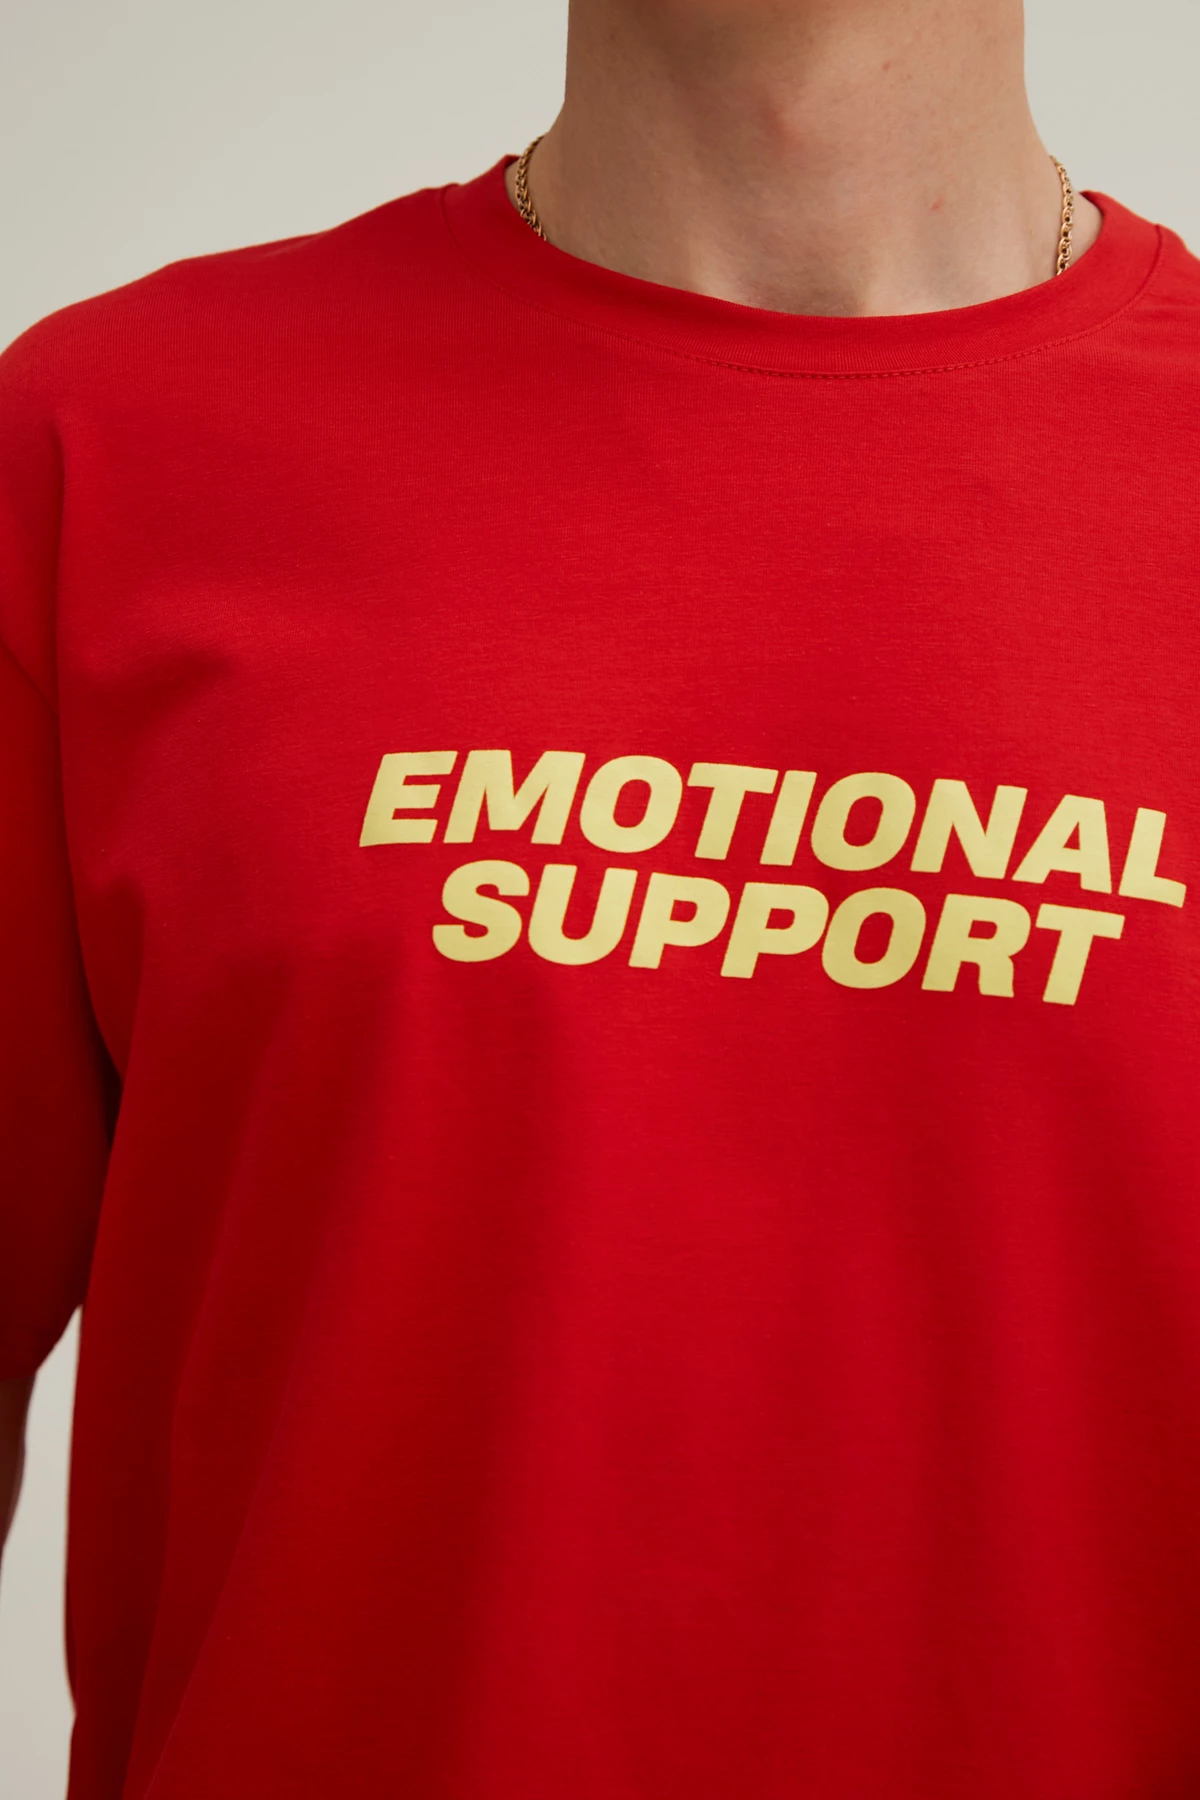 Red jersey unisex T-shirt "Emotional support", photo 8